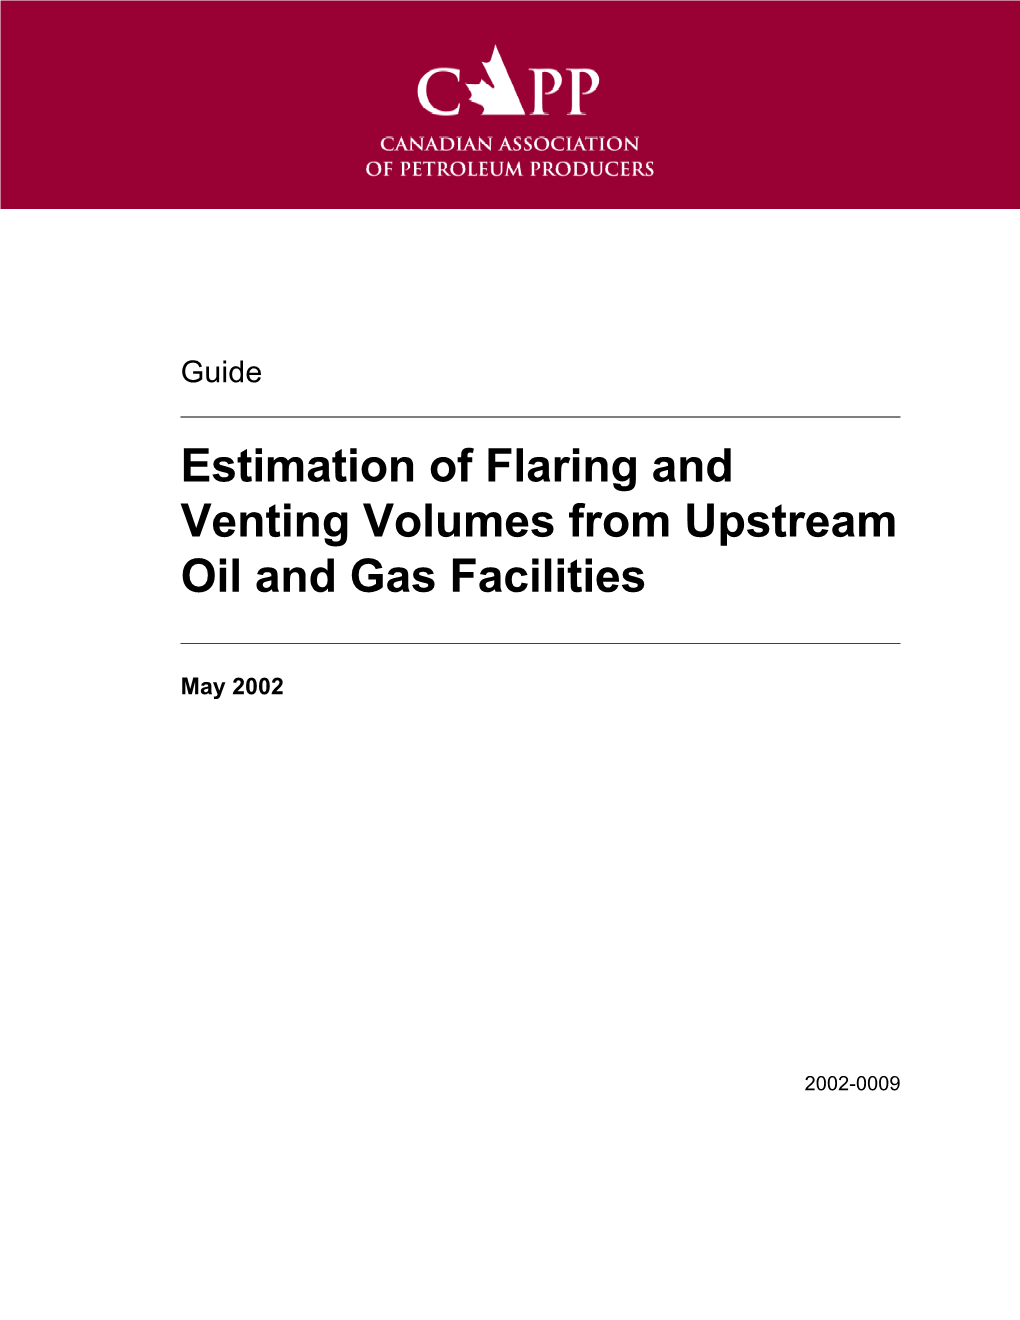 Estimation of Flaring and Venting Volumes from Upstream Oil and Gas Facilities